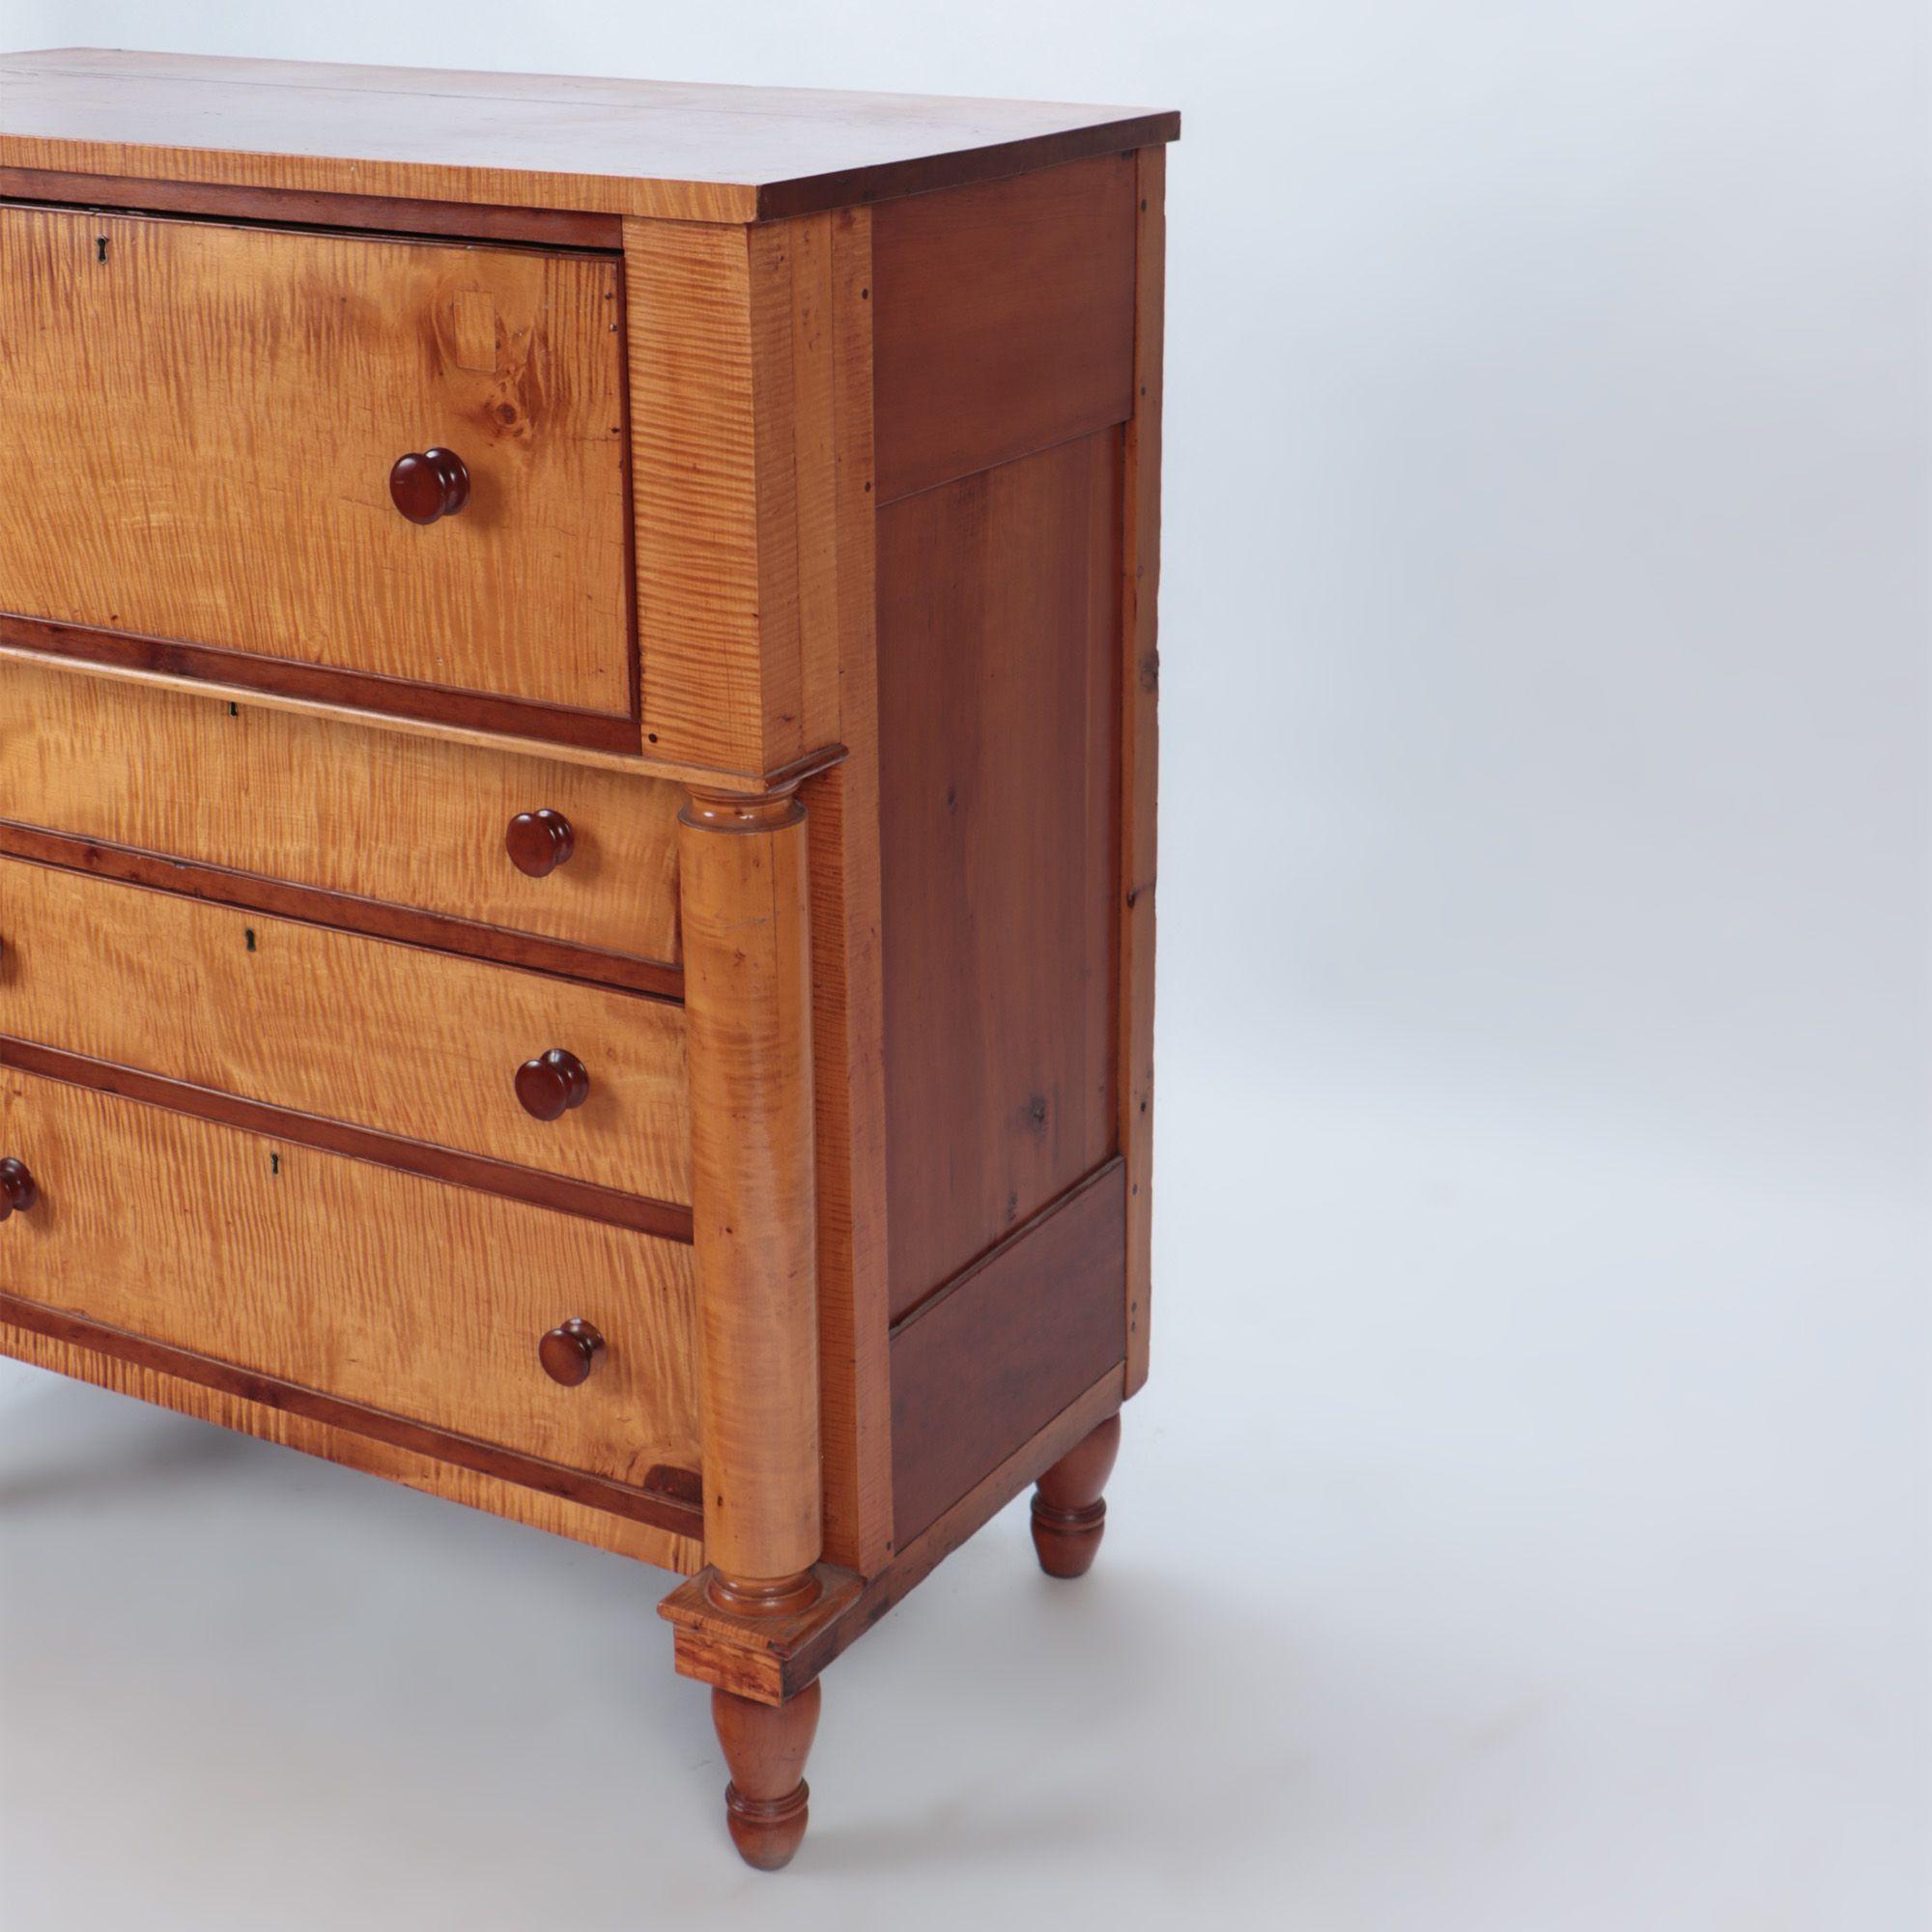 A 19th C tiger maple four drawers dresser. One overhanging drawer supported with full round columns with a set of three graduated drawers below. C 1850.